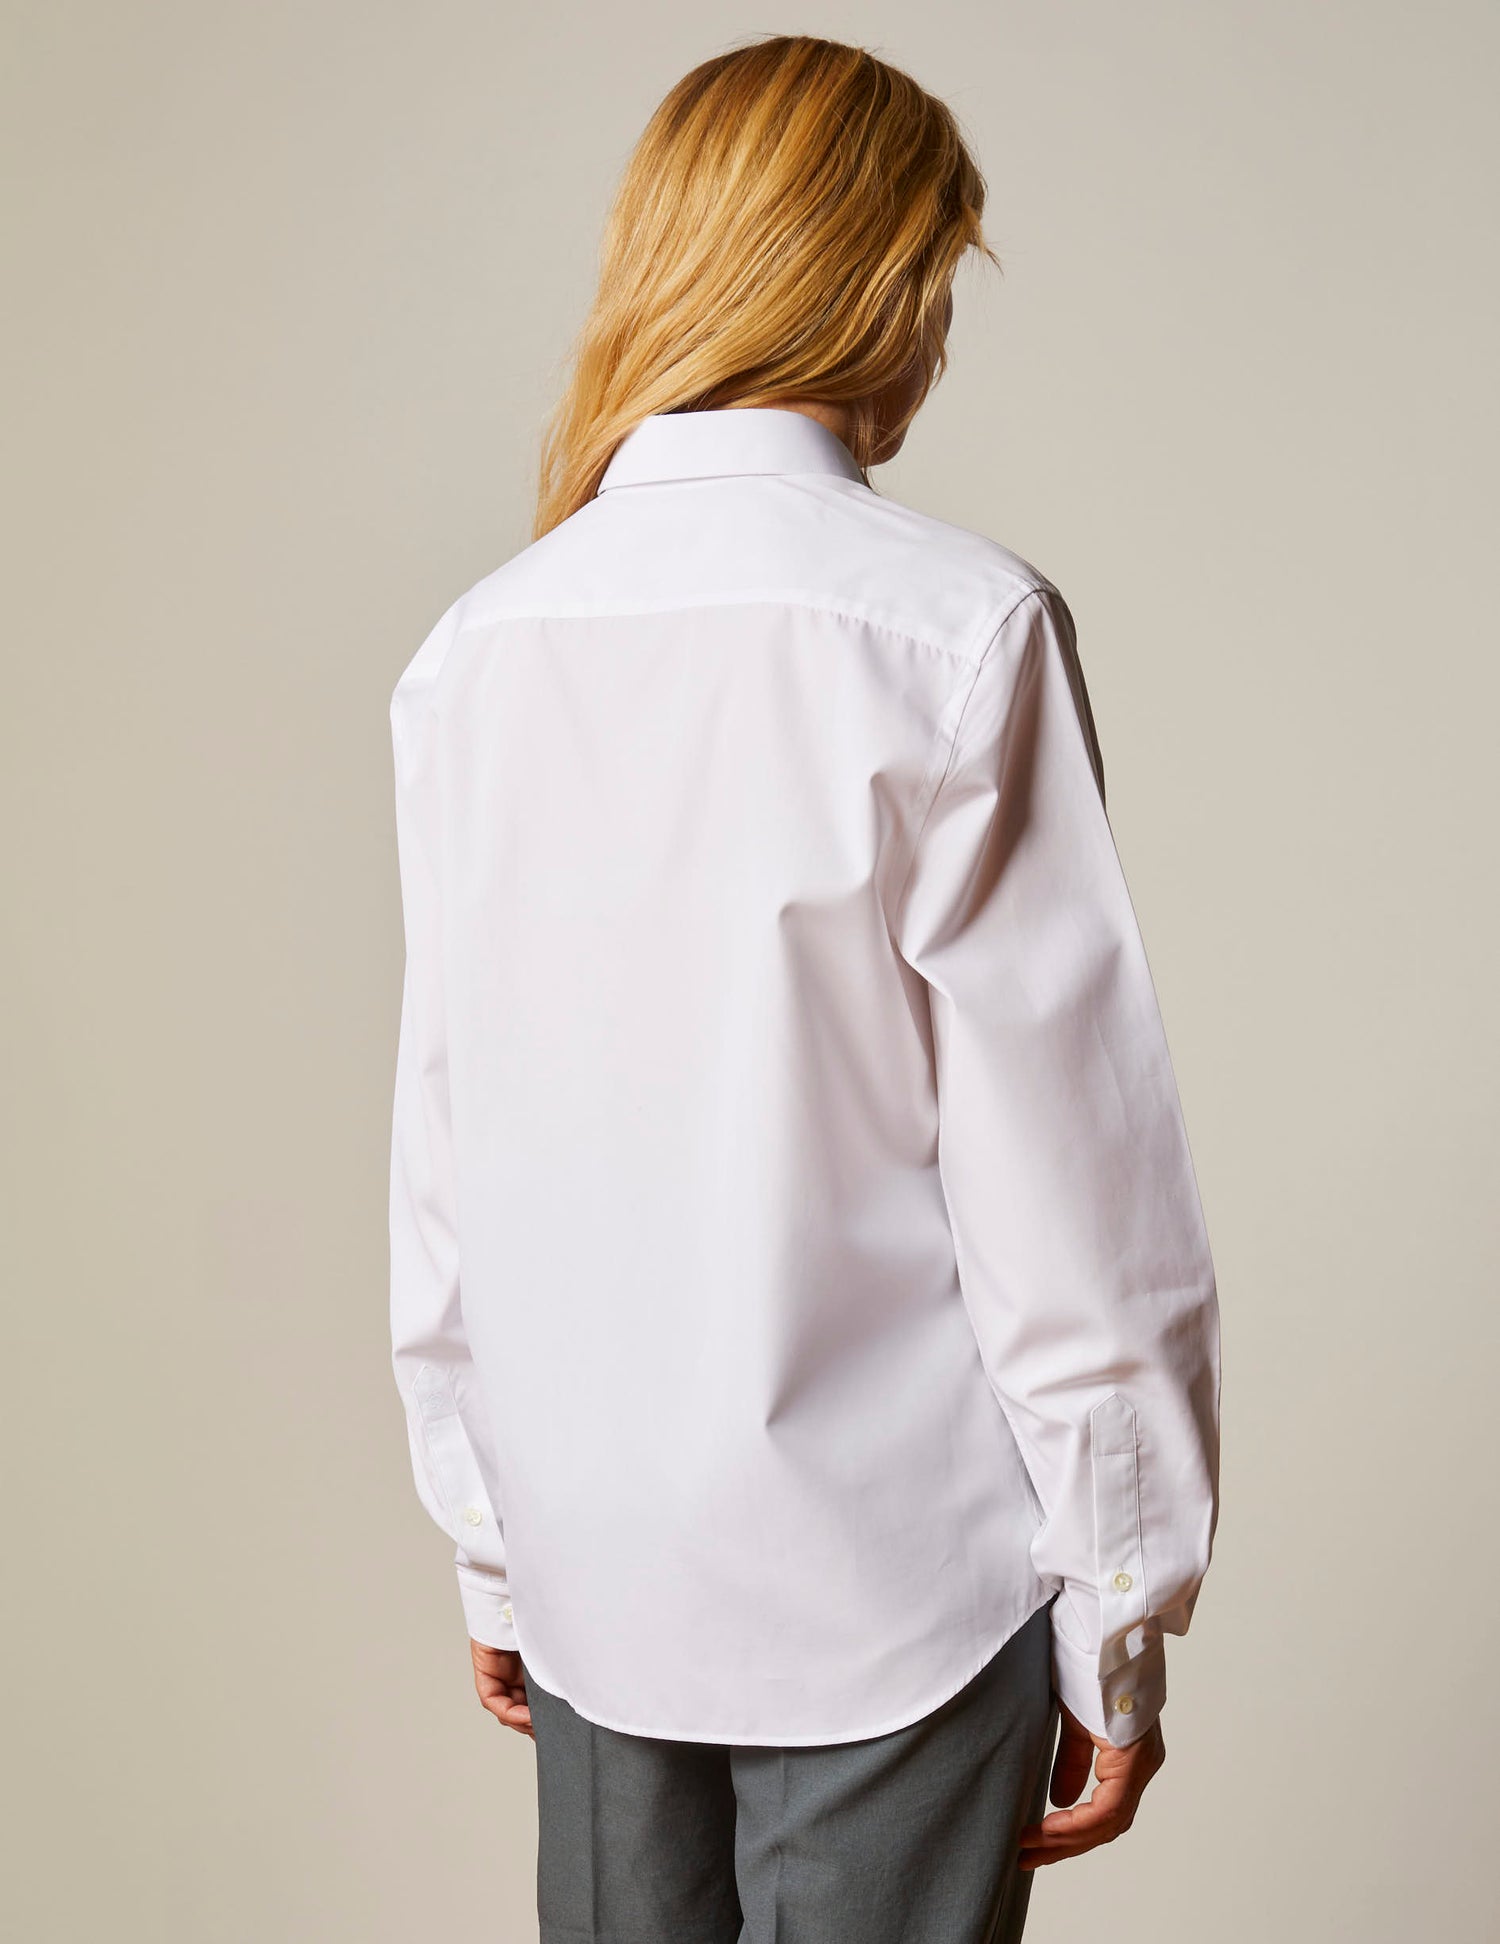 White "Je t'aime" shirt with red embroidery - Poplin - Figaret Collar#5